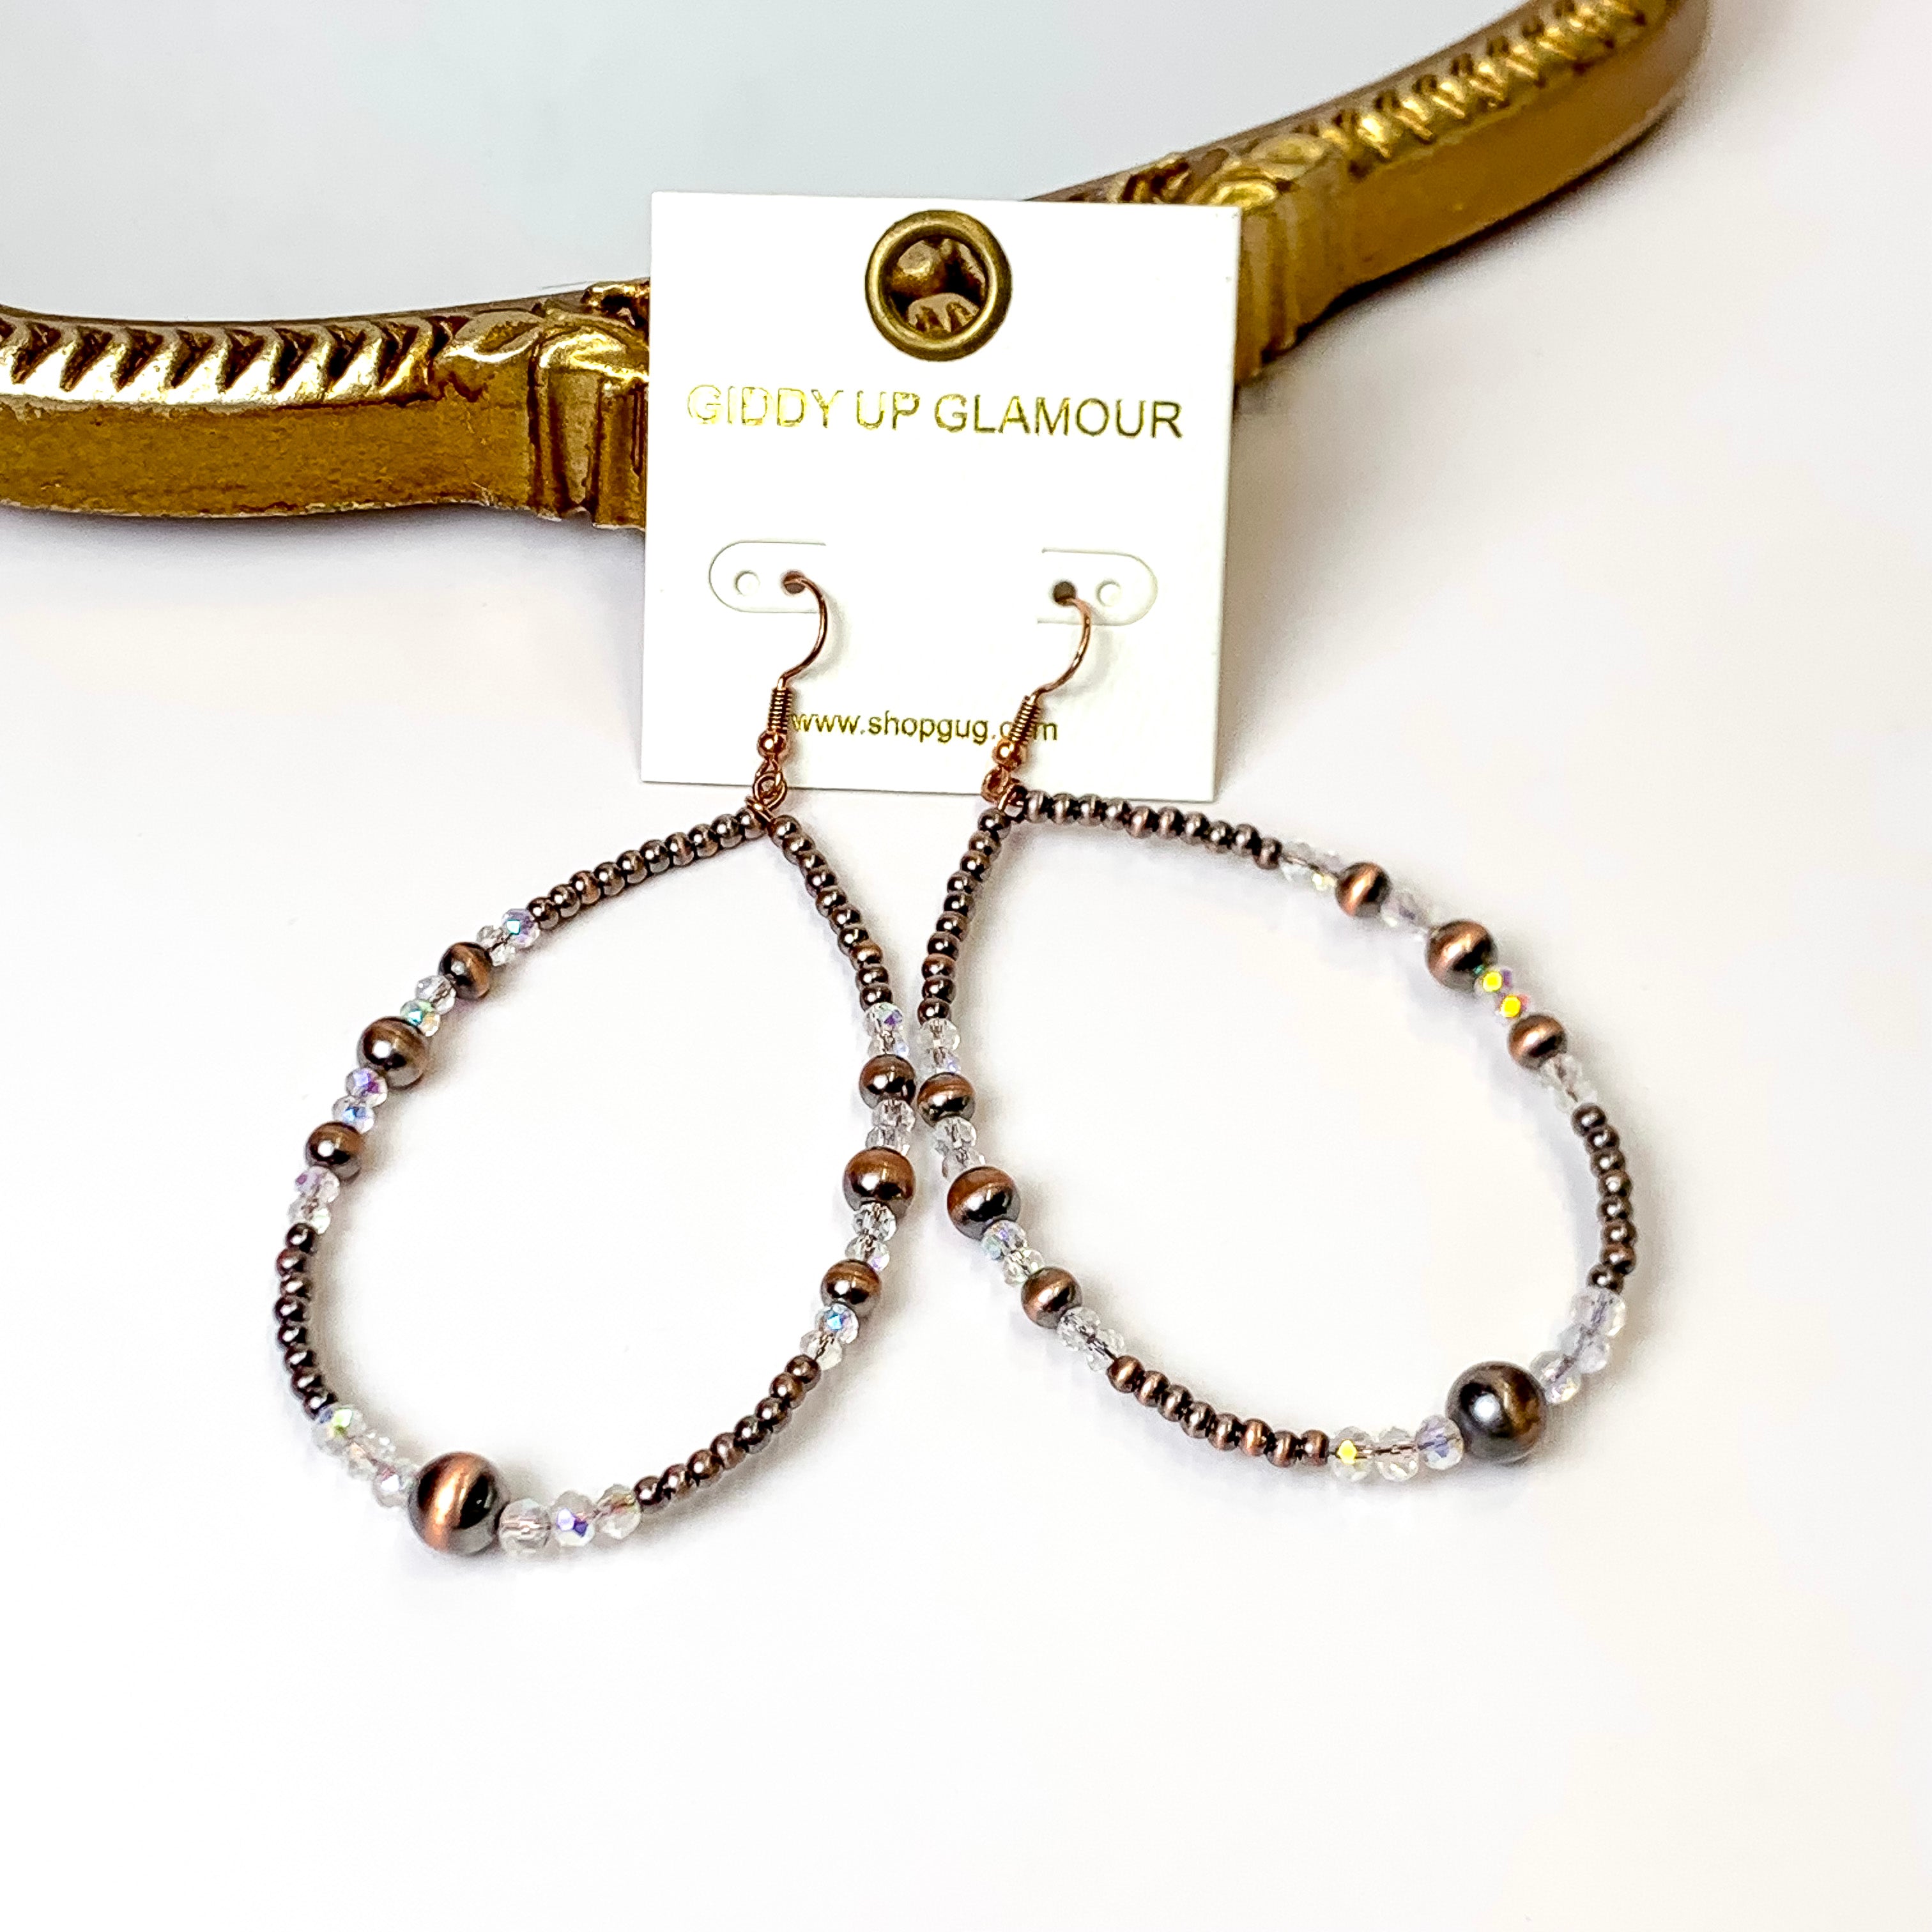 Faux Navajo Pearl Beaded Teardrop Earrings with Clear Glass Spacers in Copper Tone - Giddy Up Glamour Boutique